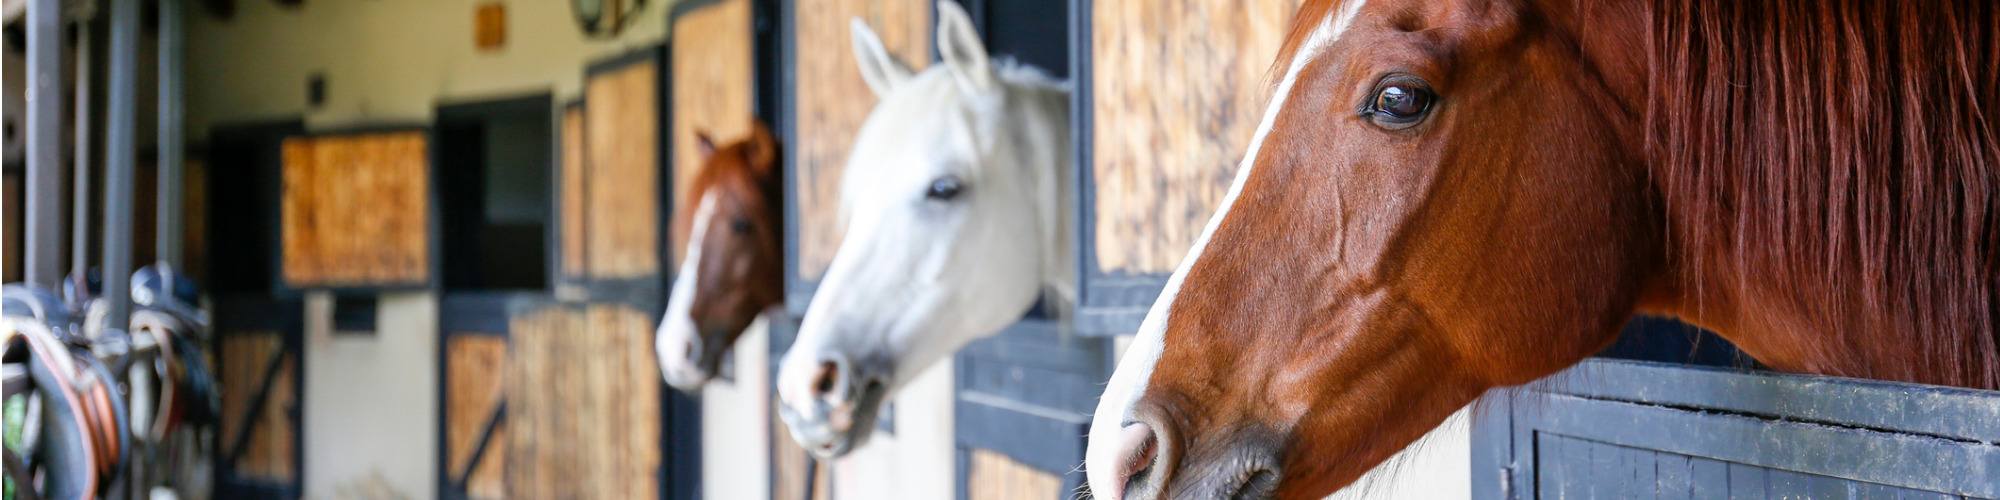 Equine Tax Planning - In a Nutshell 